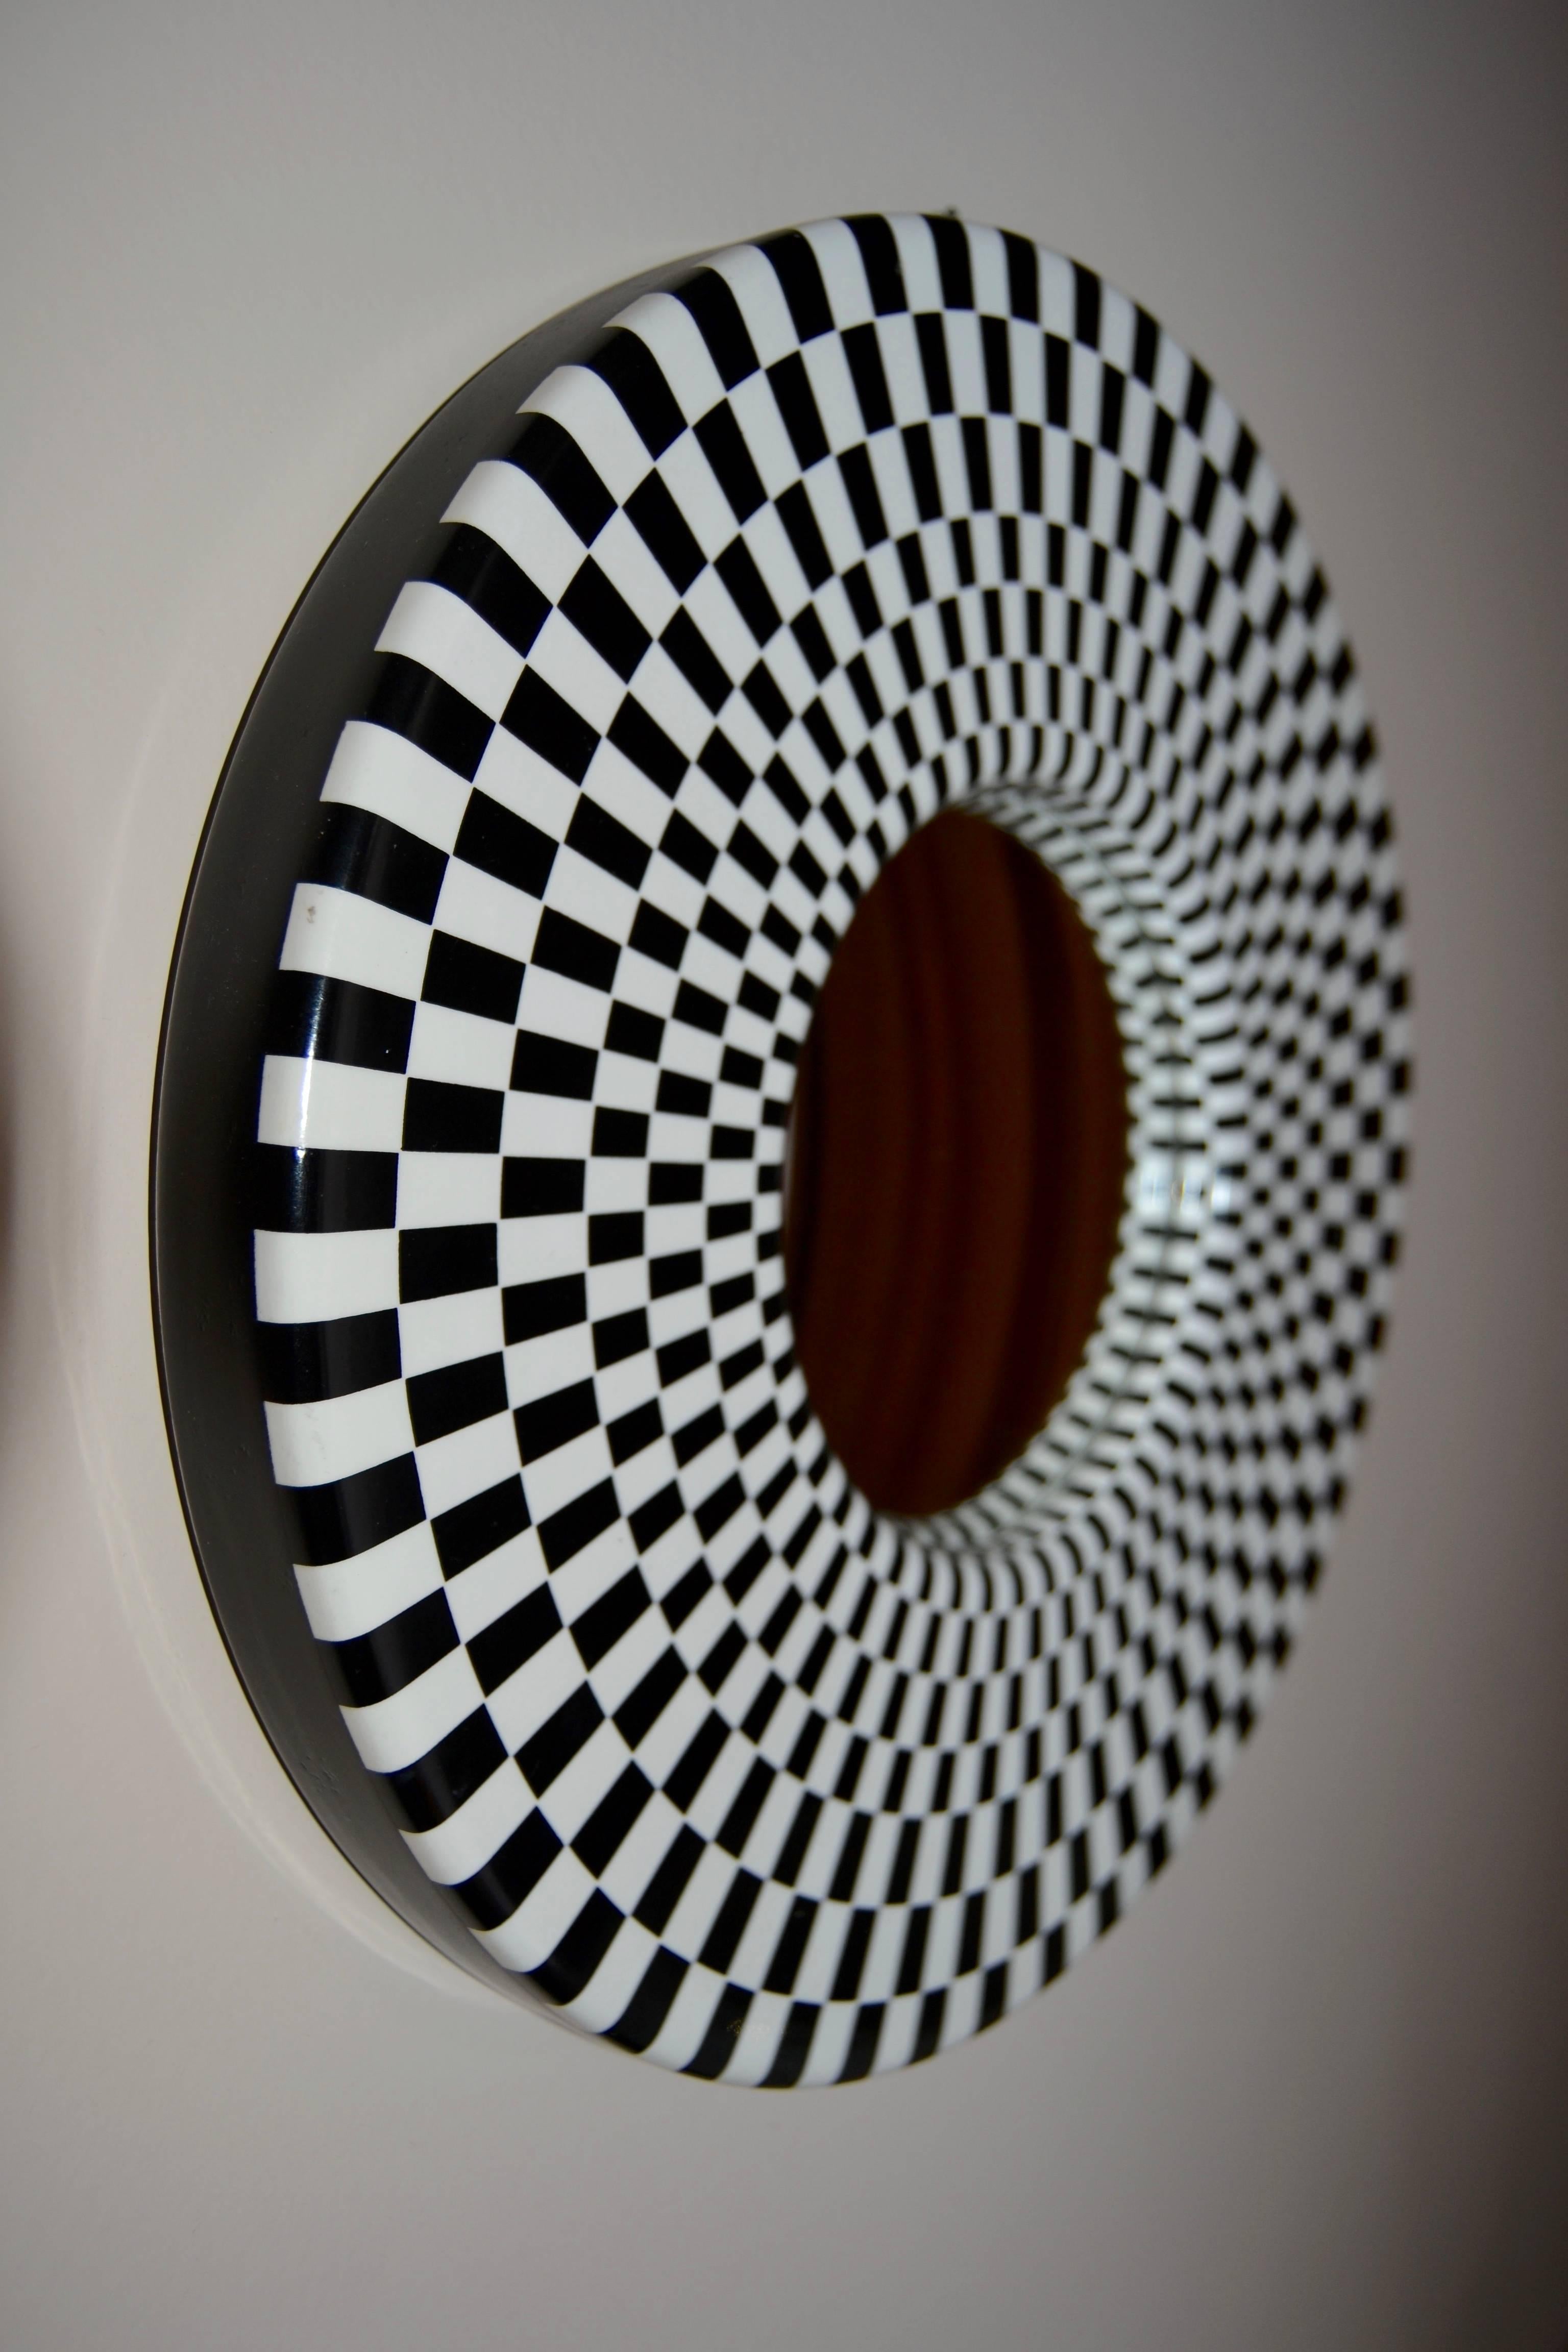 Fornasetti convex mirror with black and white pattern; signed Fornasetti Milano n1-2003.
Great condition.